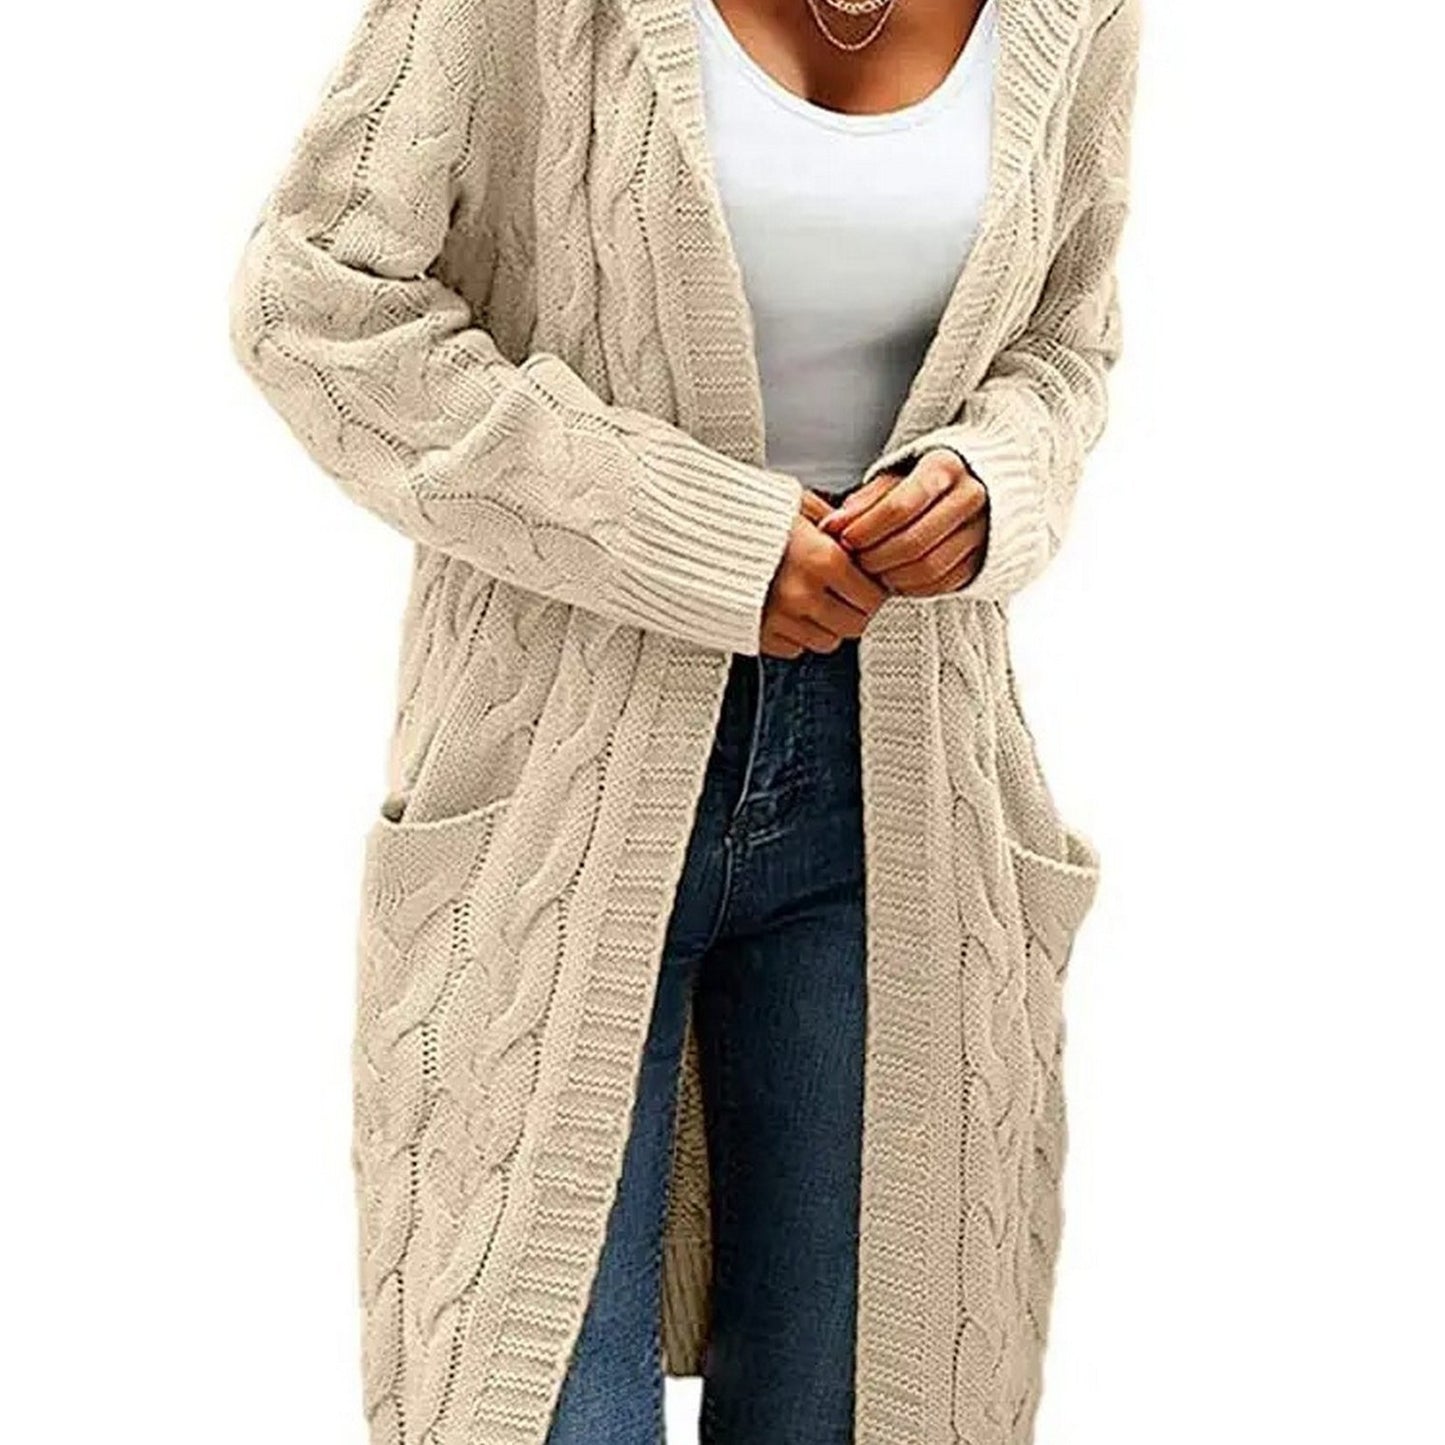 Women's Sweater Hooded Twist Knit Solid Thick Pocket Long Cardigan